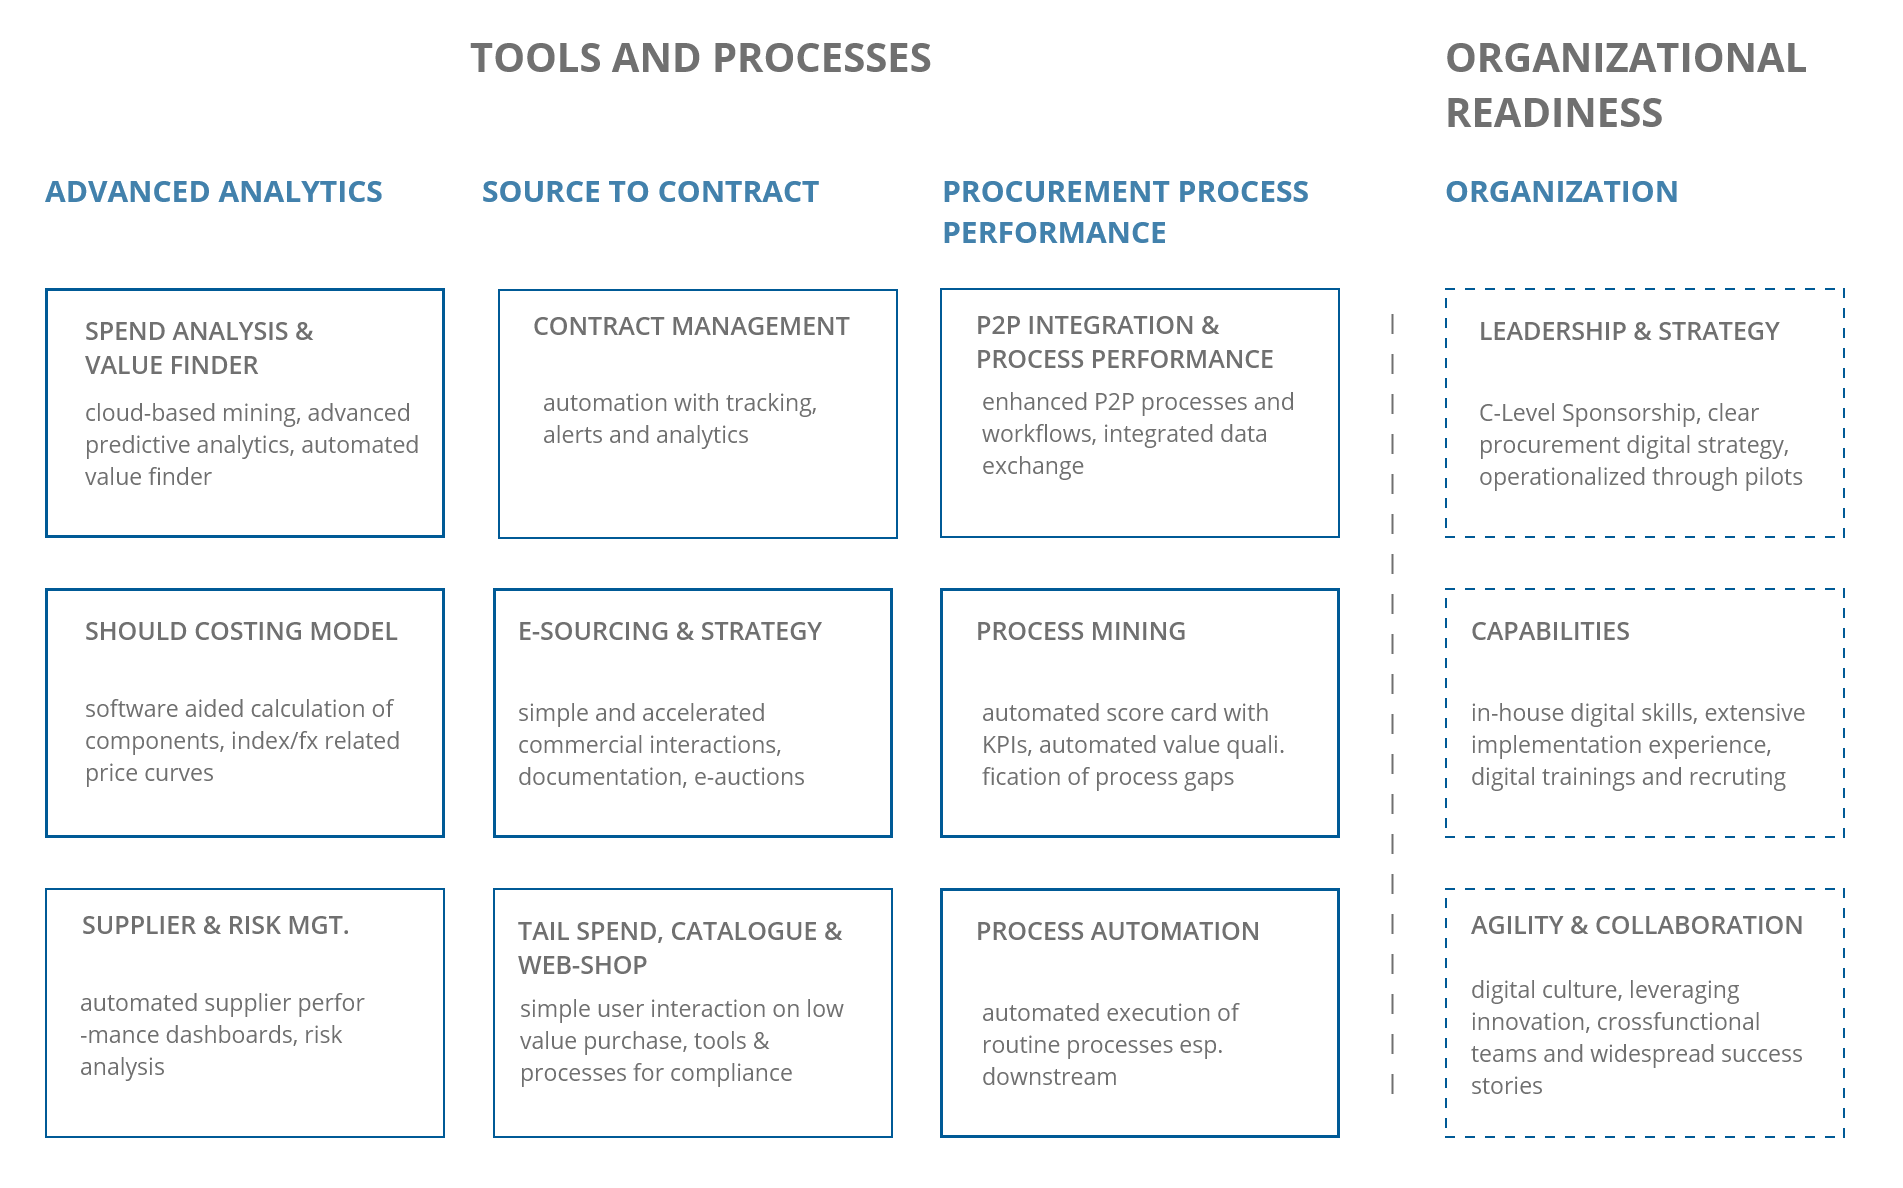 Chart with a total of 12 different fields: Tools & processes and organizational readiness regarding the digitalization in procurement